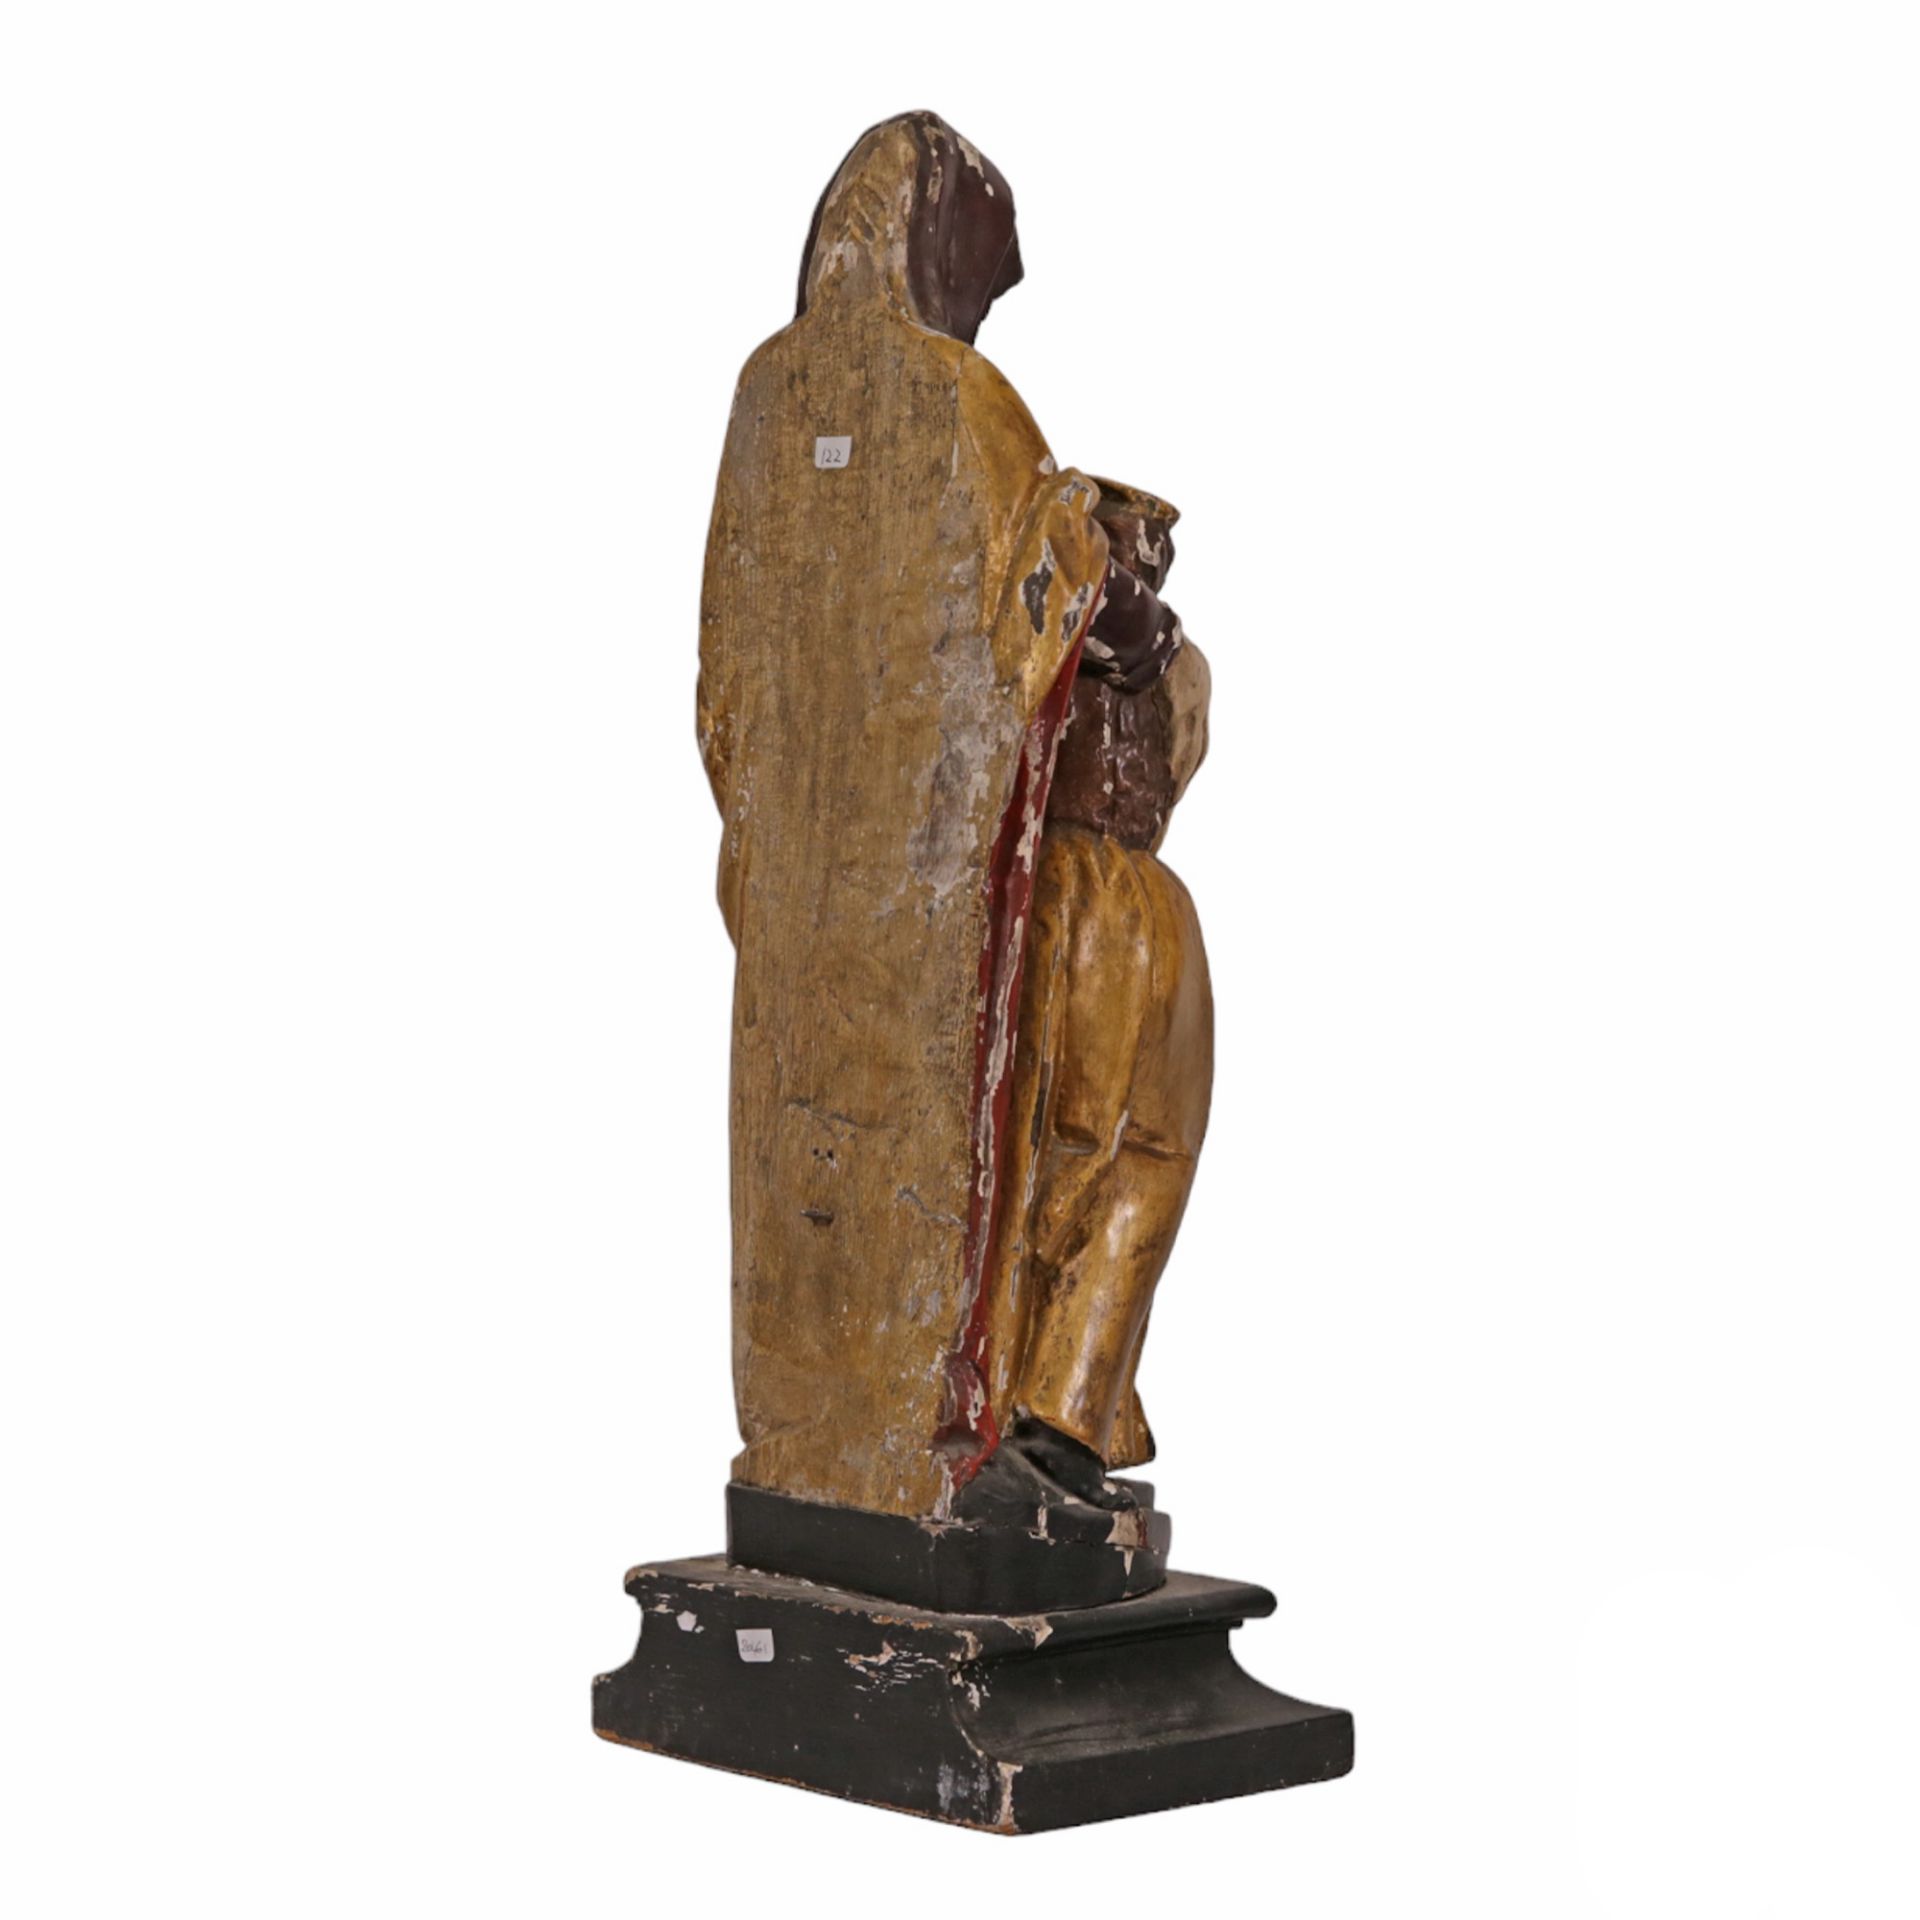 RARE, ANTIQUE, POLYCHROME WOODEN SCULPTURE "SAINT ANNE TRINITI", ON THE BASIS. FRANCE 19th CENTURY. - Image 8 of 13